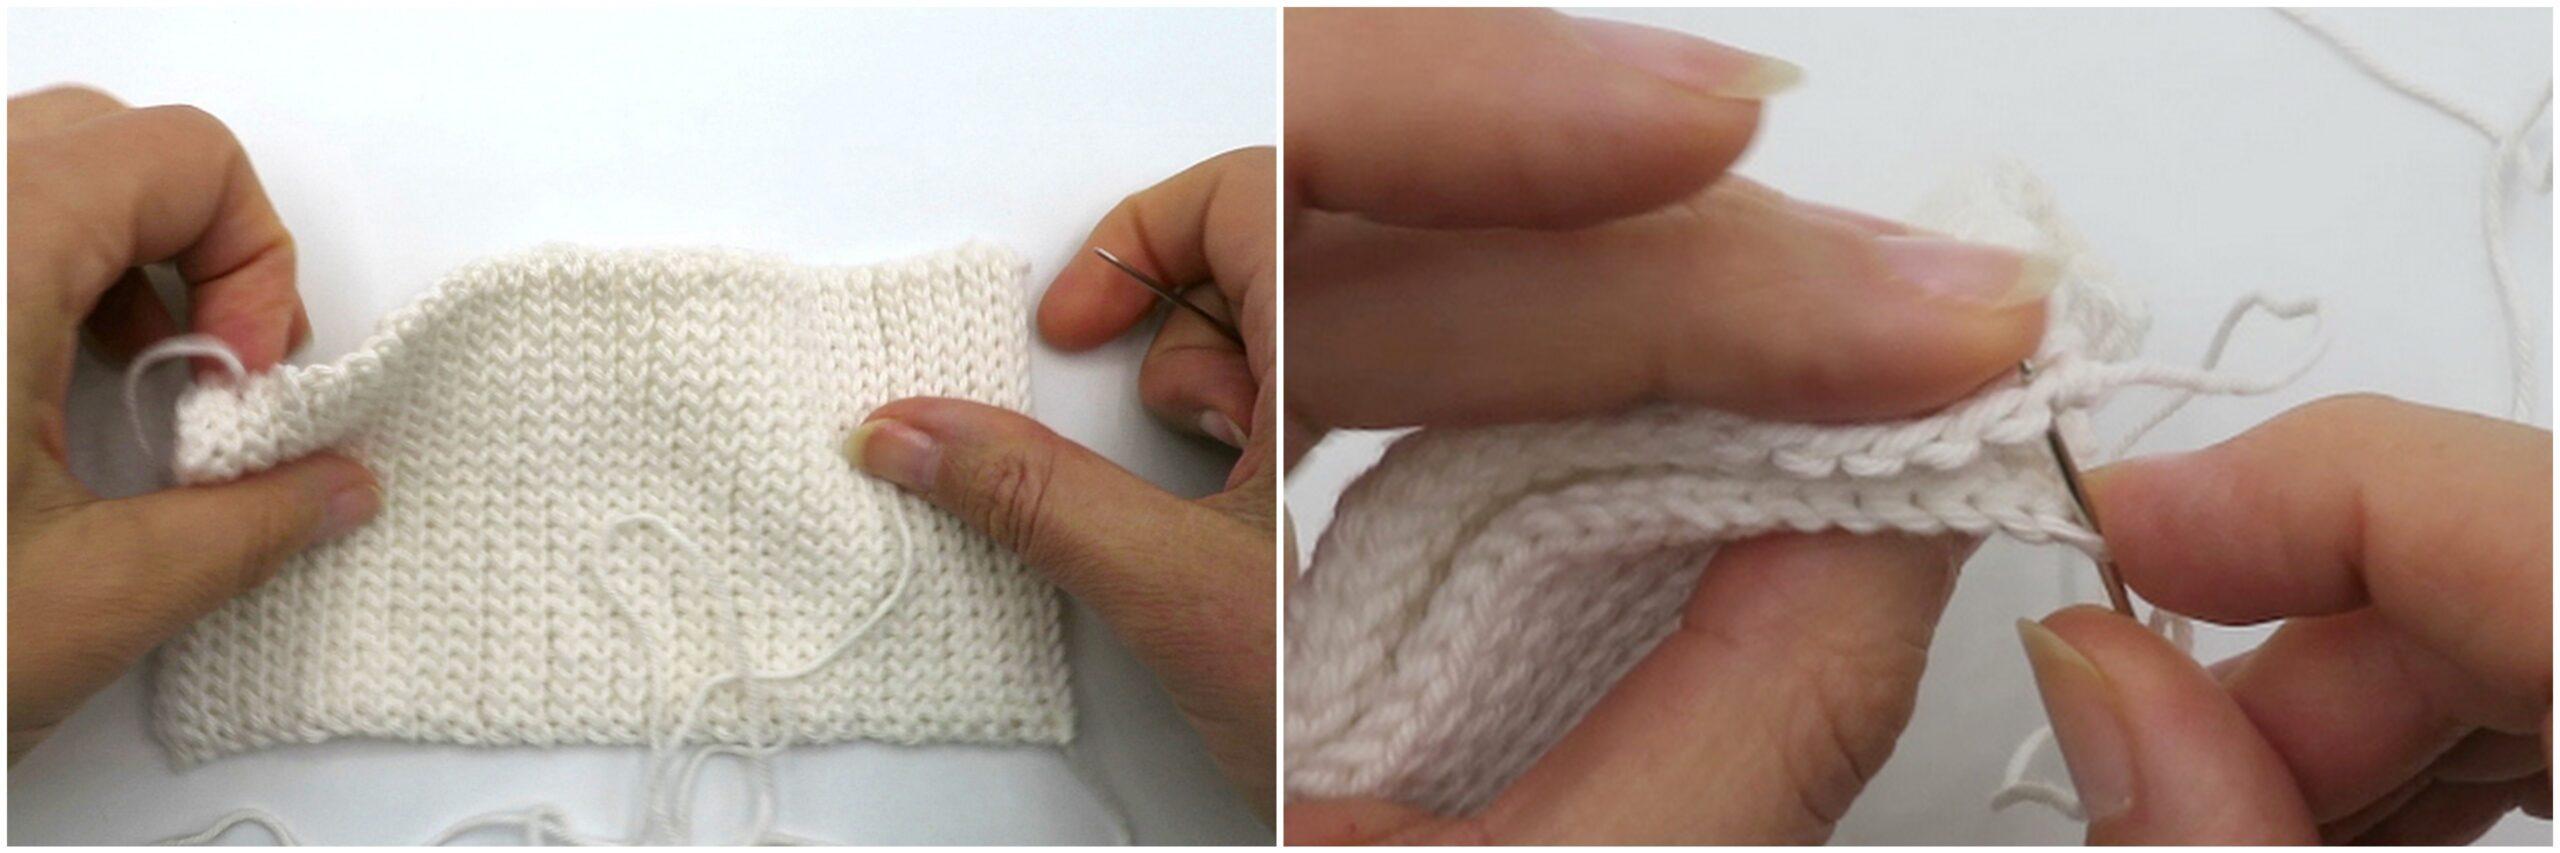 two images showing a crochet cuff being pinned to a sweater ready to be sewn on